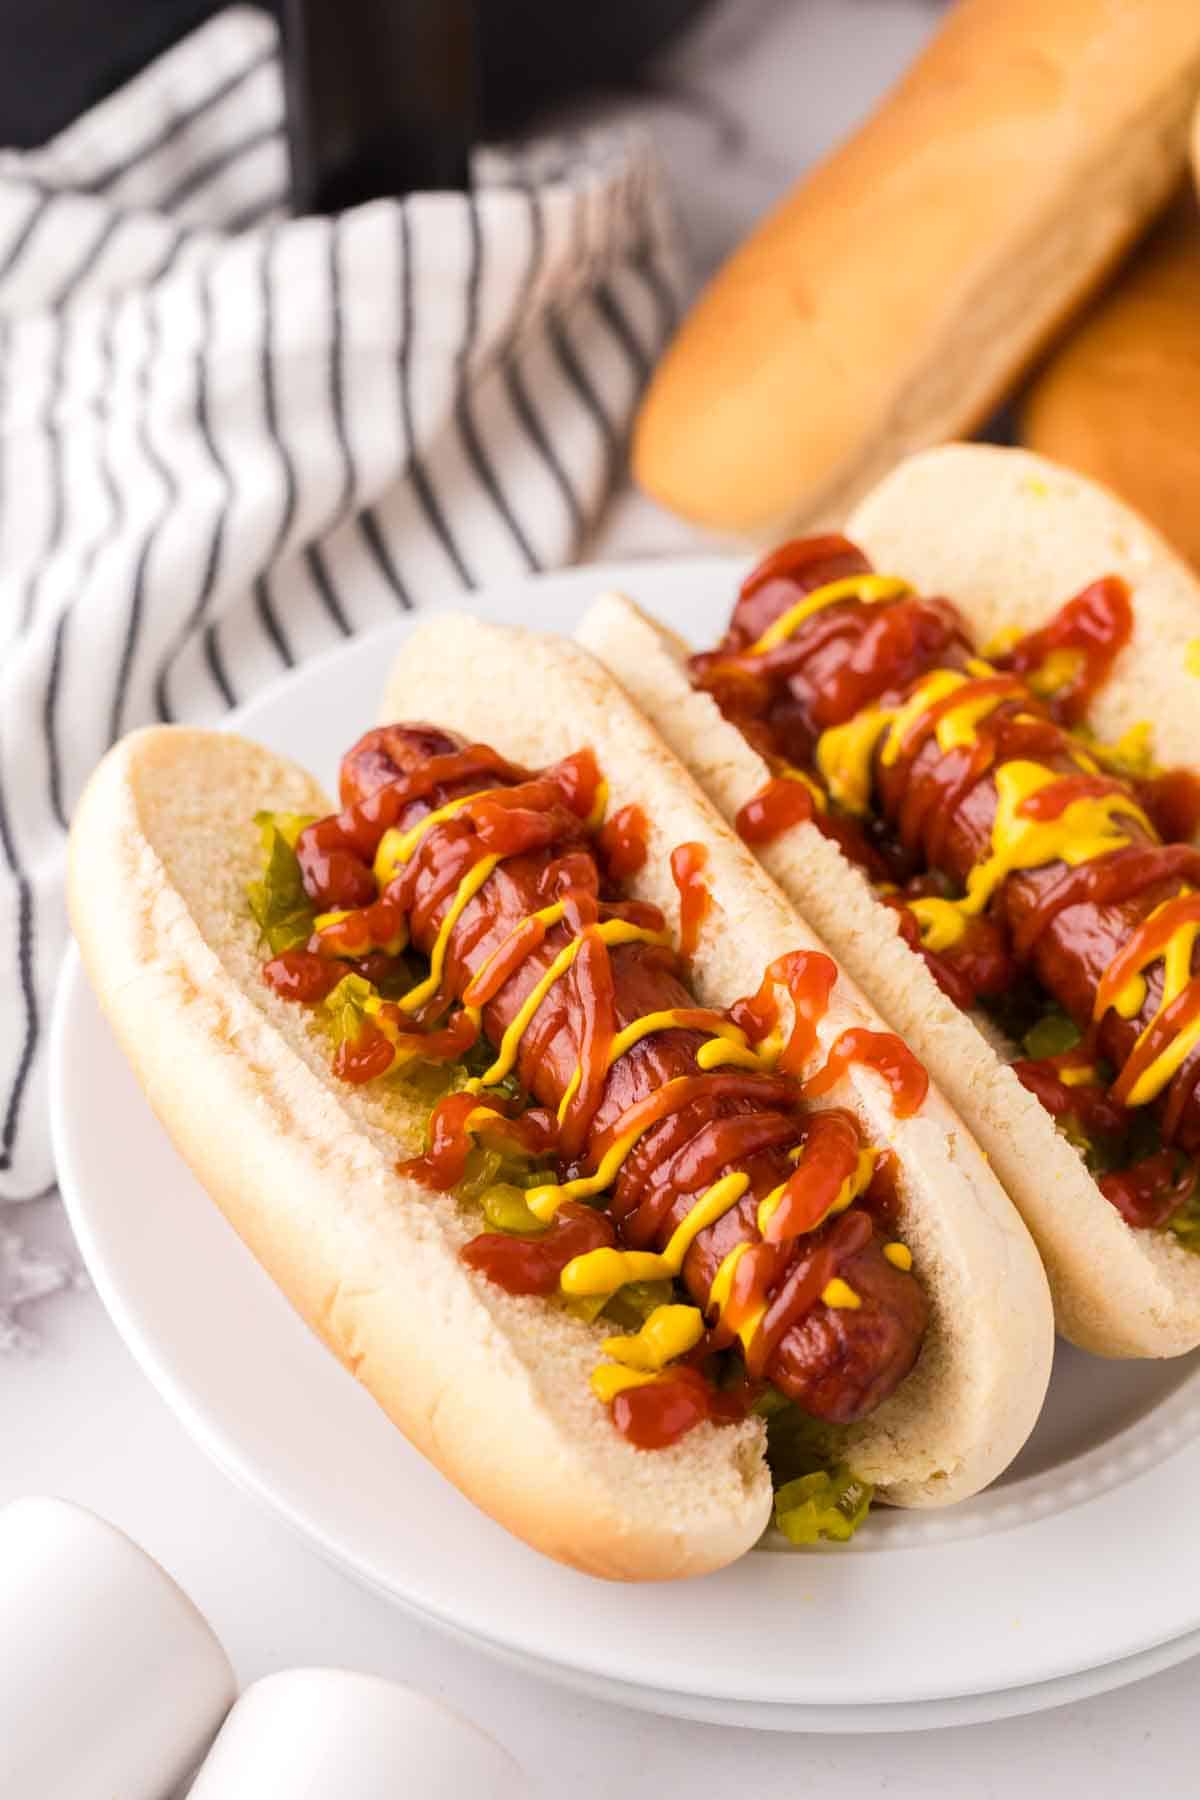 brats with ketchup mustard and relish in a traditional bun